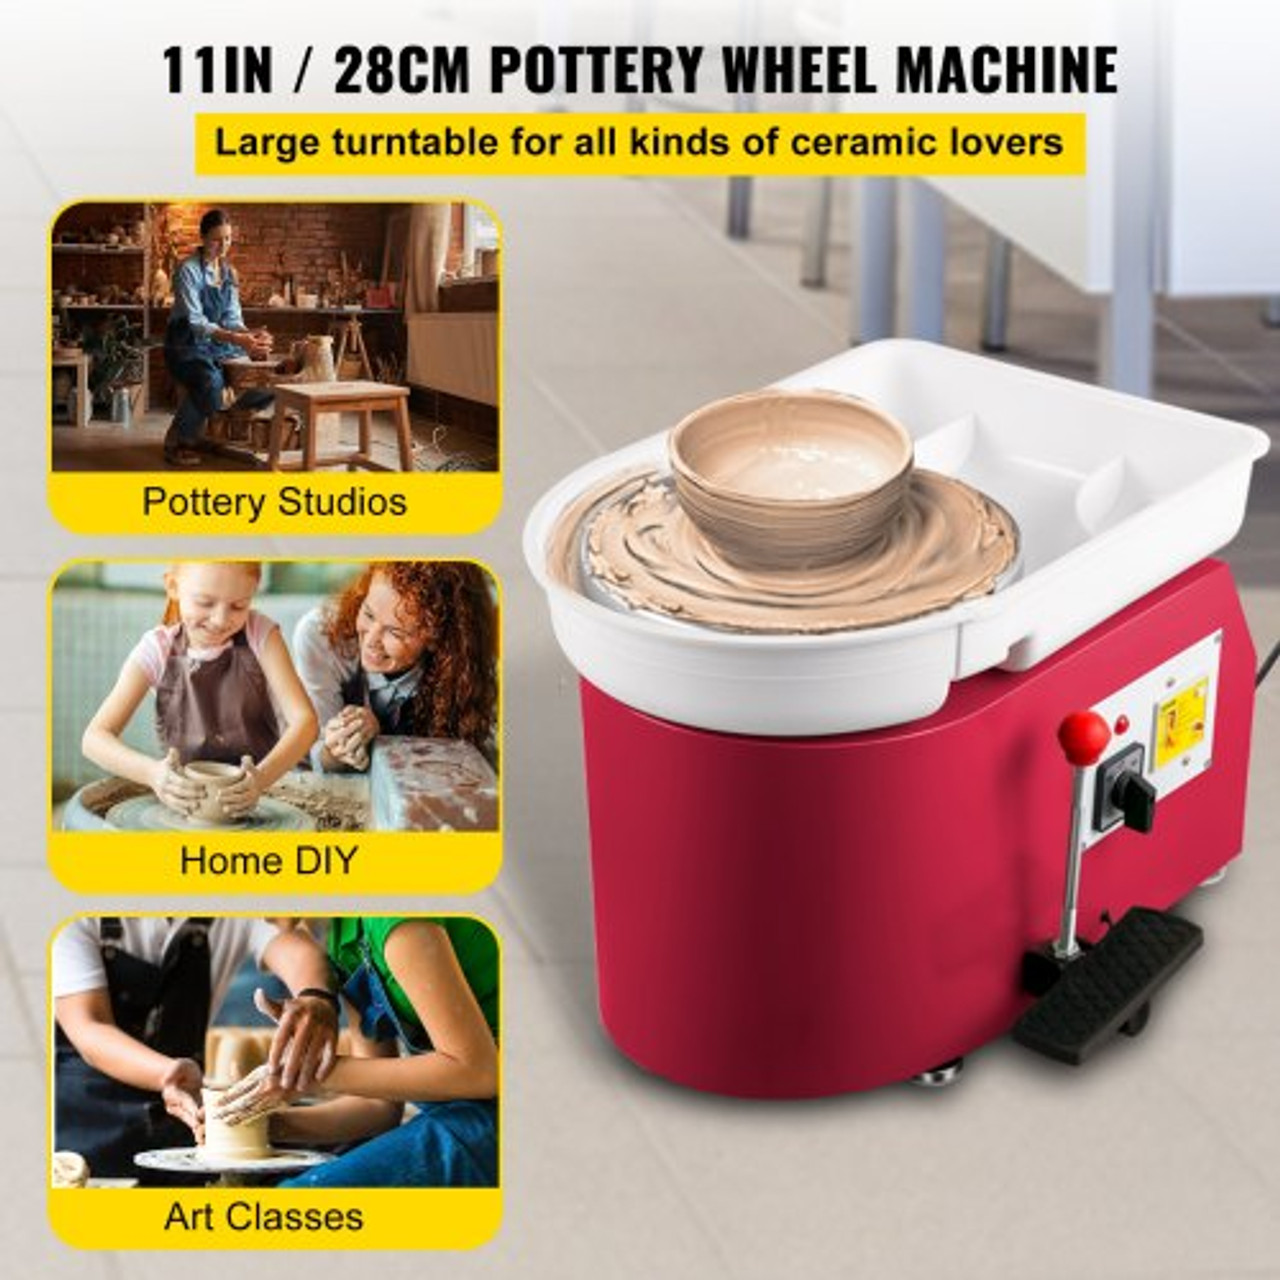 Pottery Wheel 28cm Pottery Forming Machine 350W Electric Pottery Wheel with Adjustable Feet Lever Pedal DIY Clay Tool with Tray for Ceramic Work Clay Art DIY Clay Pink, 18 Piece